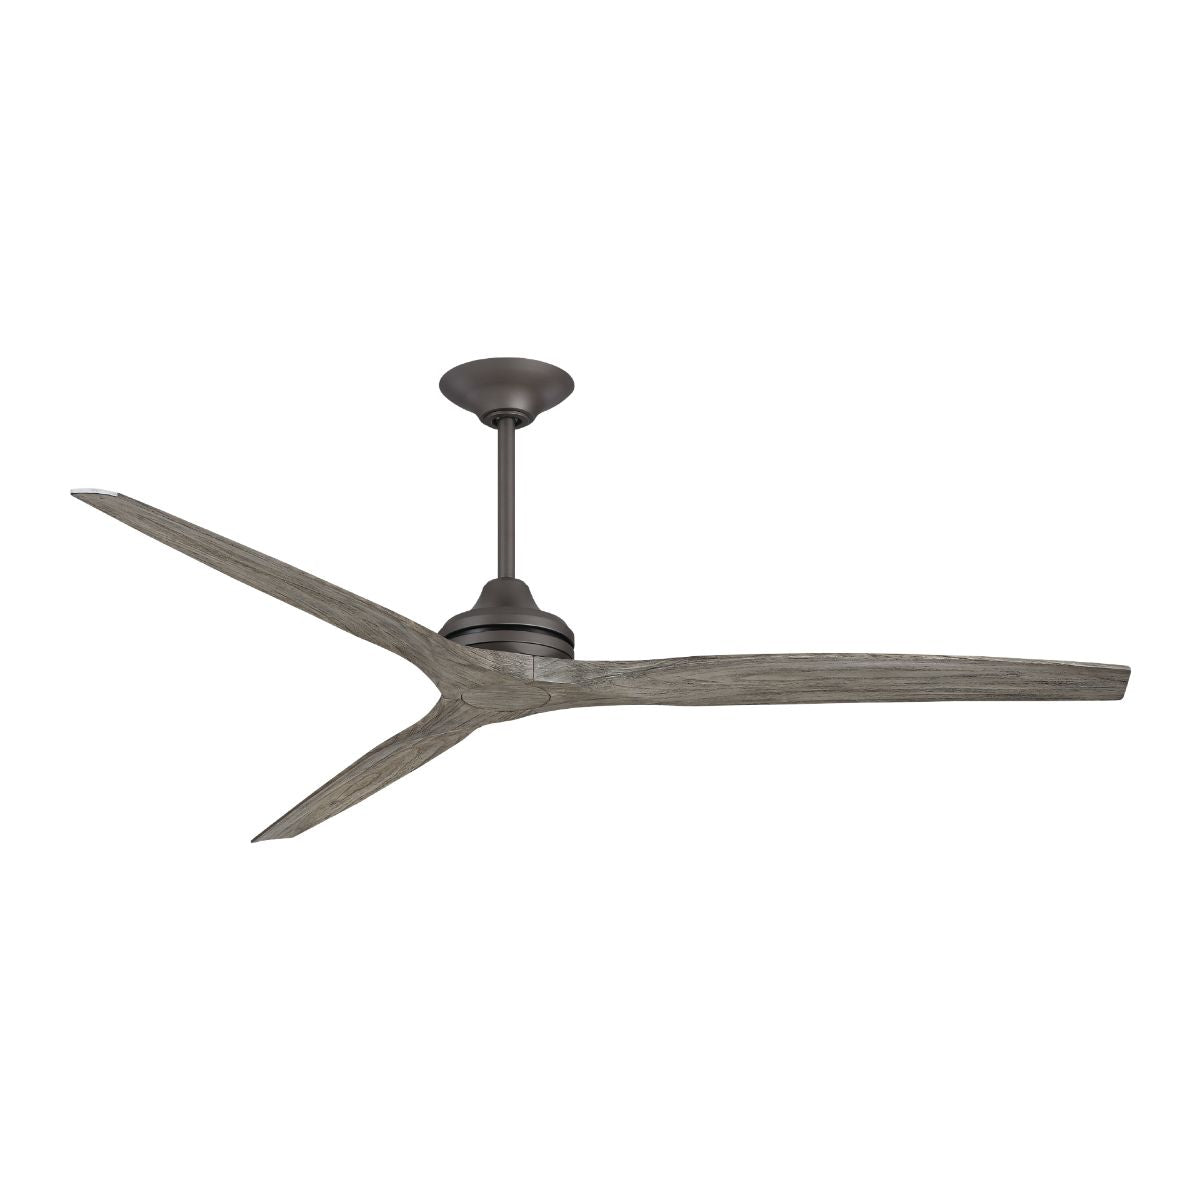 Spitfire DC Outdoor Ceiling Fan Motor With Remote, Matte Greige Finish, Set of 3 Blades Sold Separately